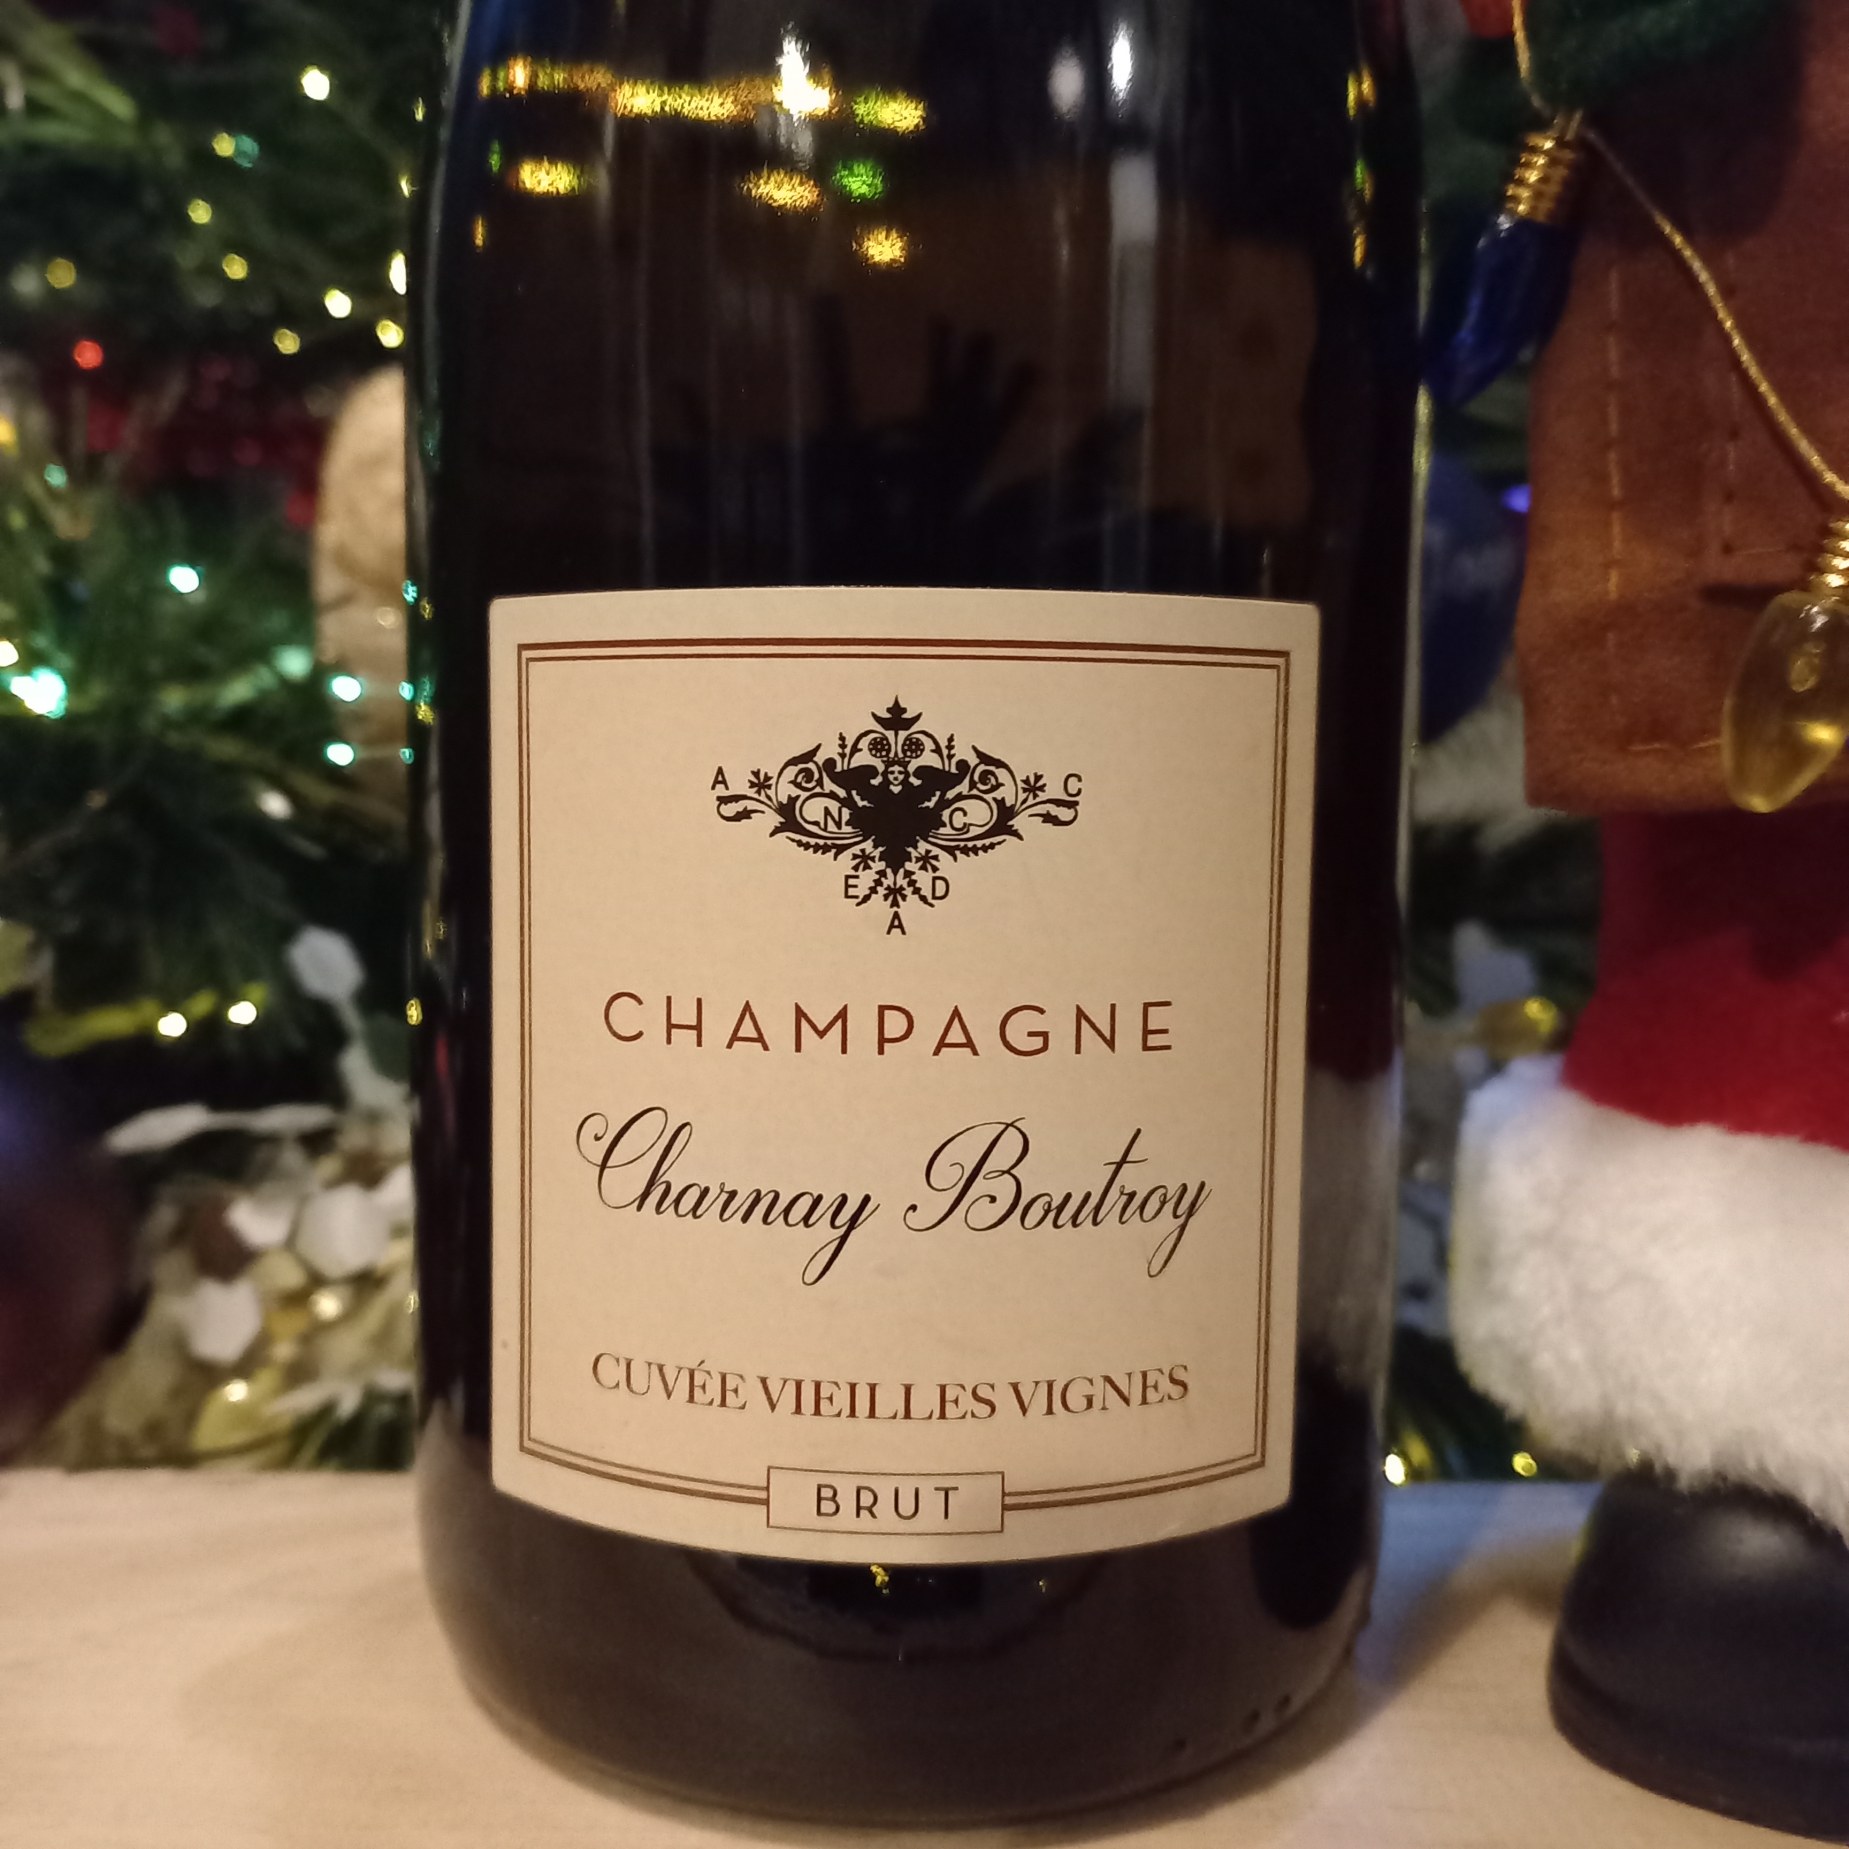 Champagne Charnay Boutroy. Cuvée Vieilles Vignes.